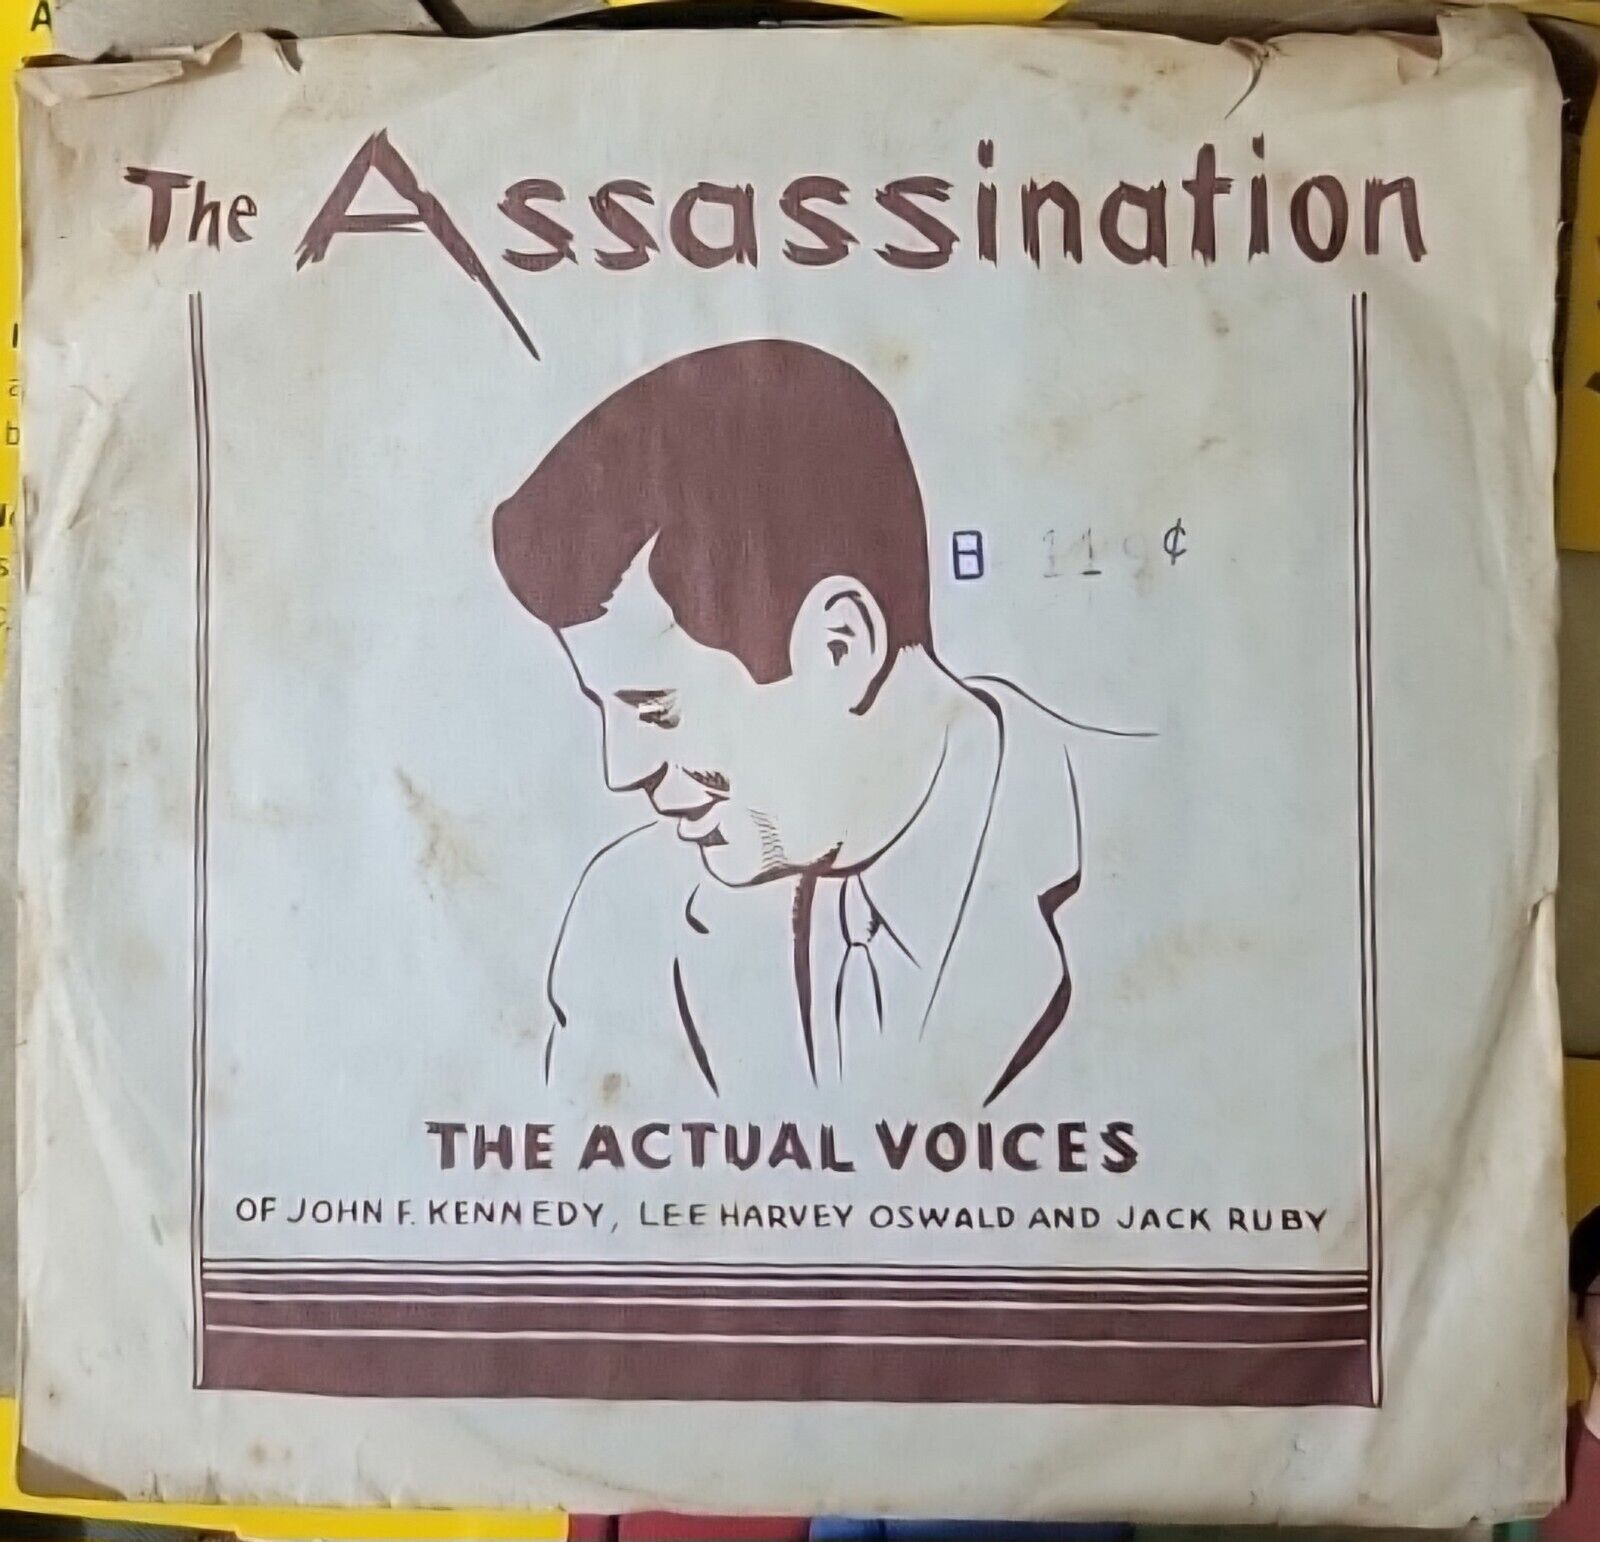 The Assassination Auctual Voices John F. Kennedy -  Oswald - Ruby 45RPM